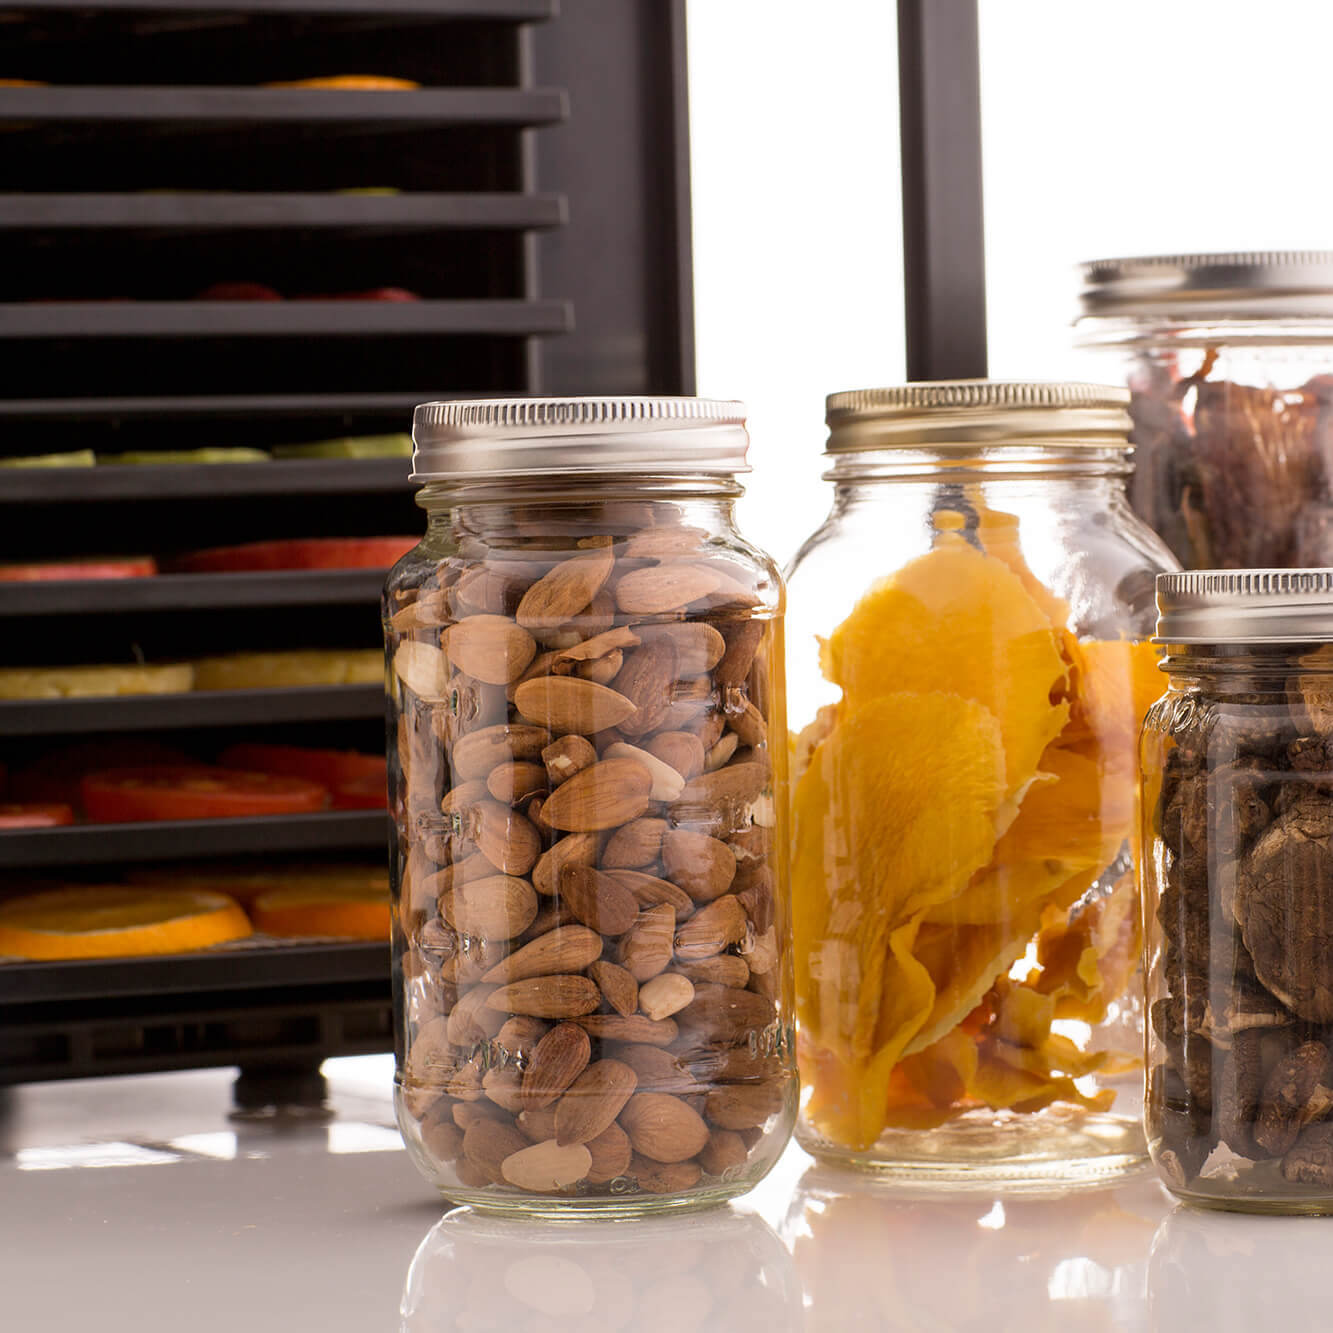 Glass jars filled with dried produce placed in front of an Excalibur RES10 dehydrator.